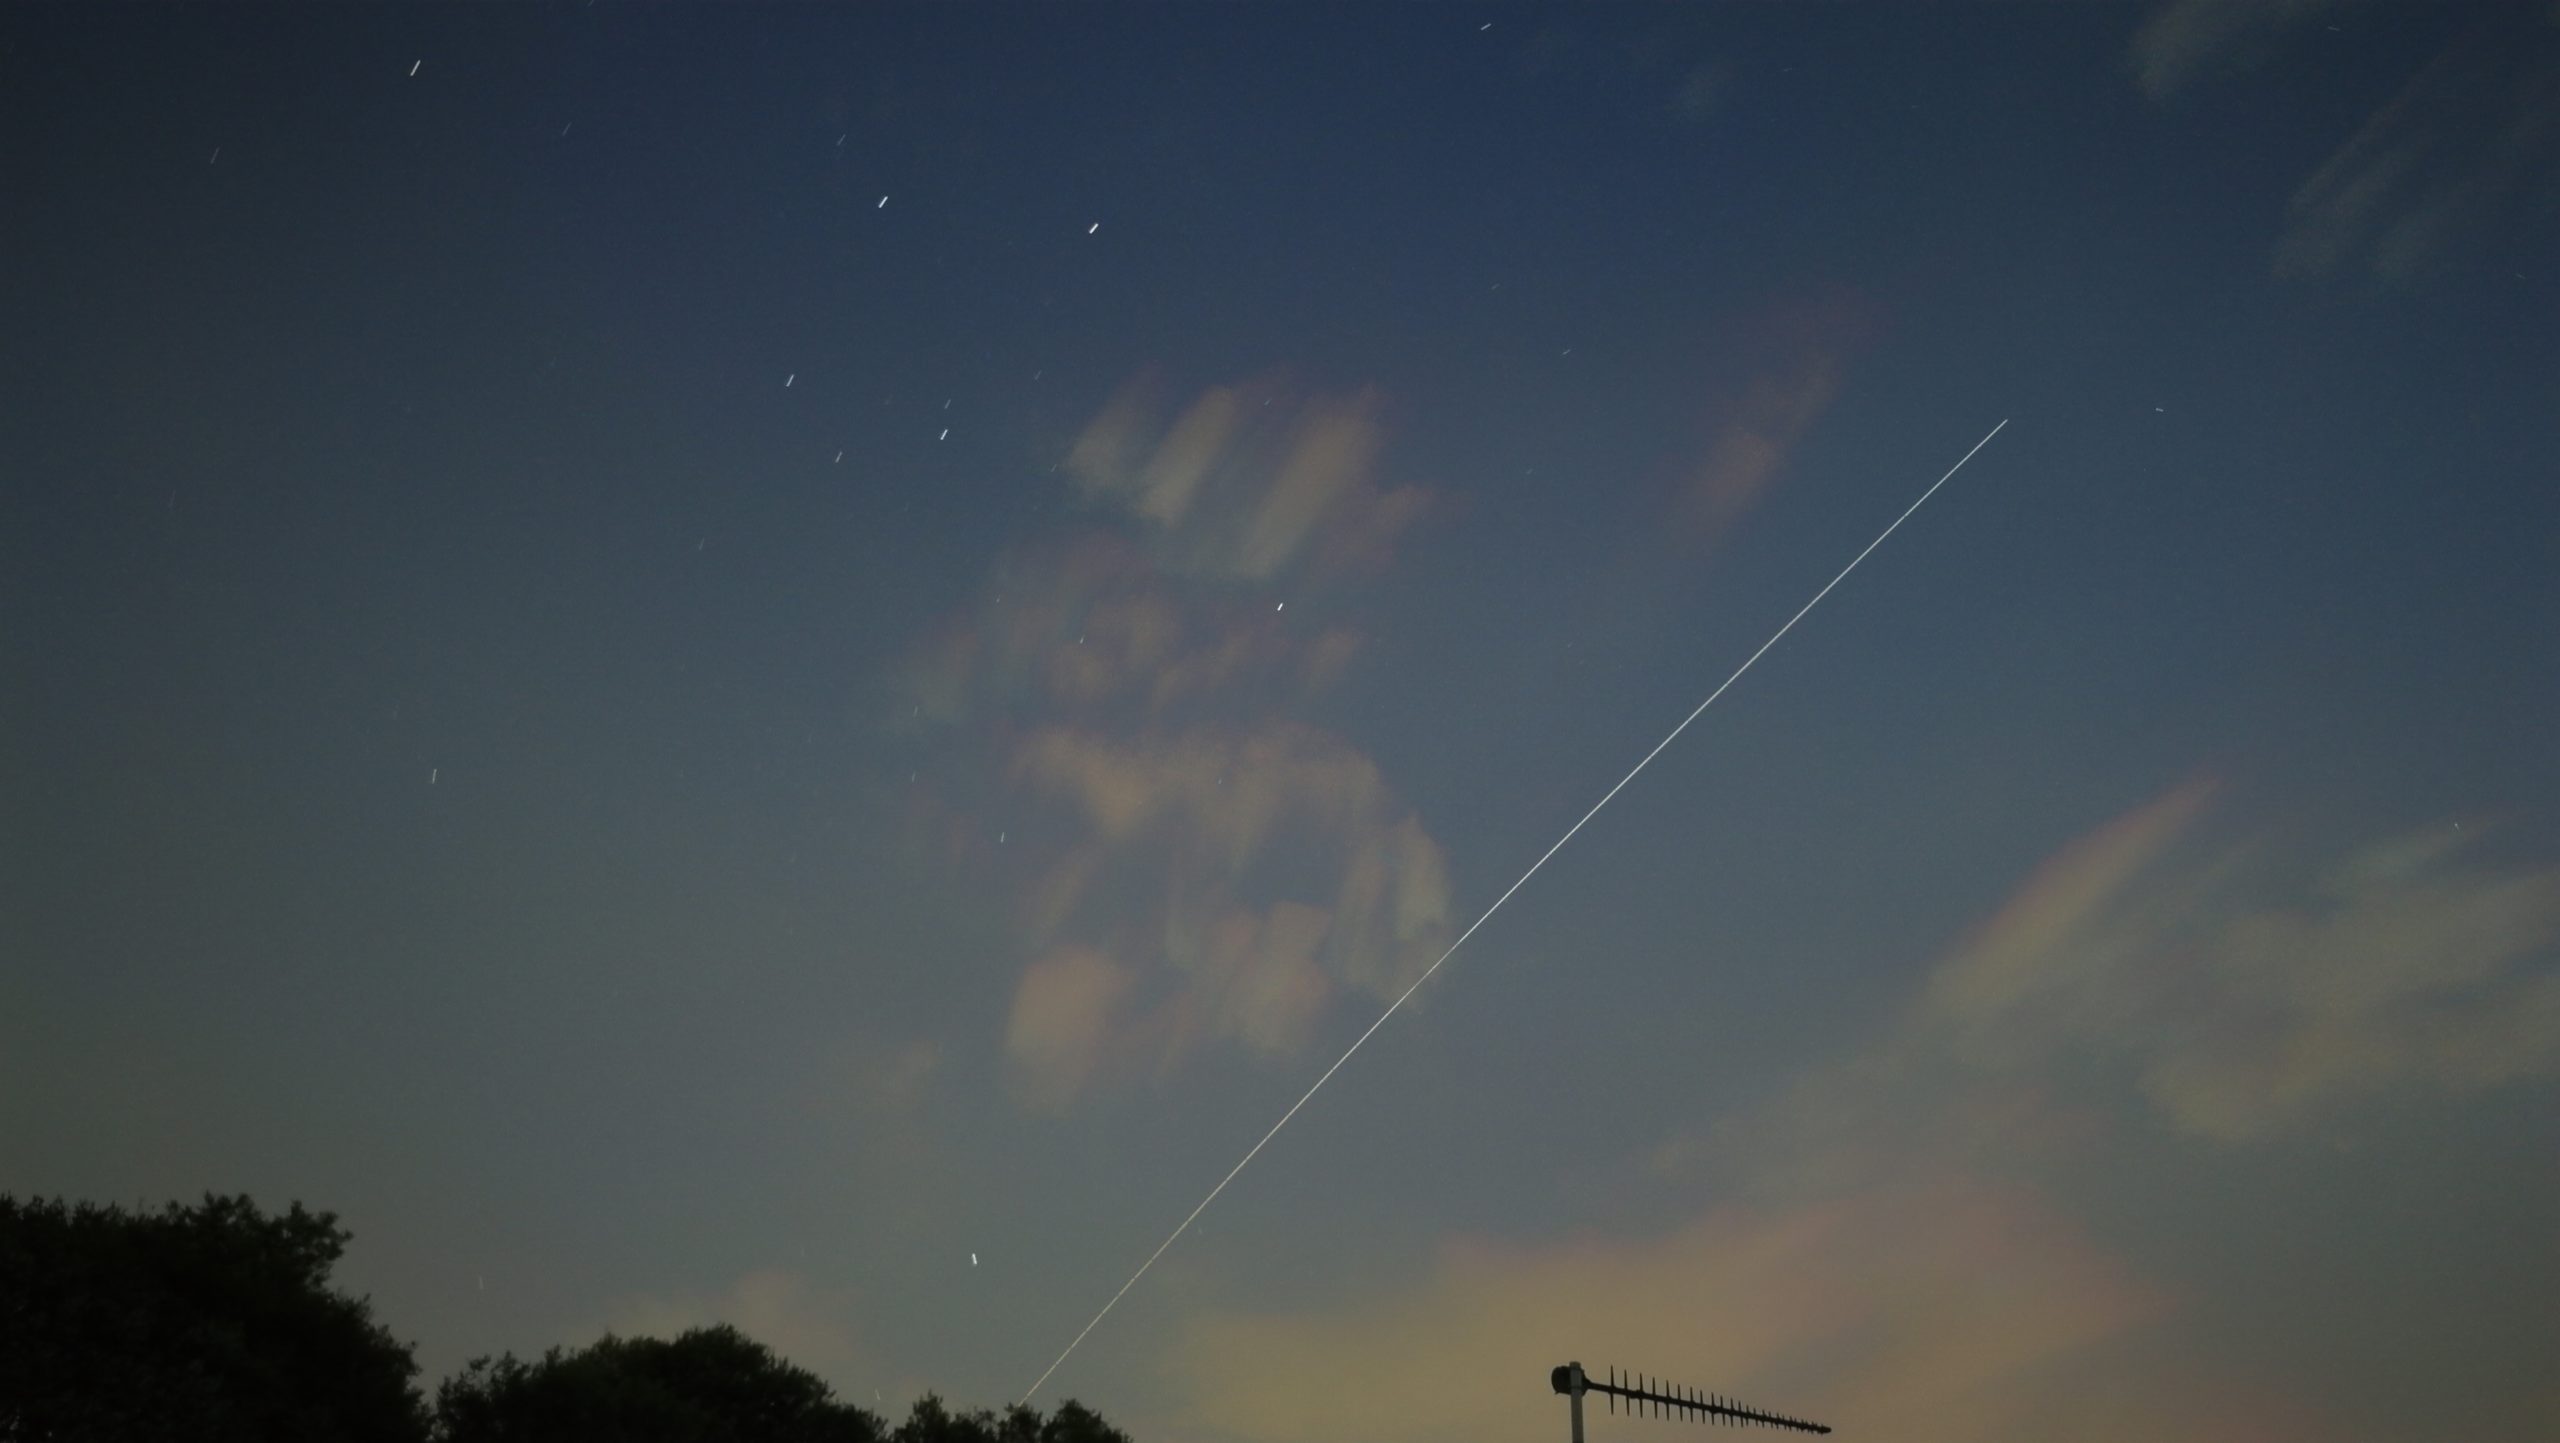 ISS pass with Huawei Mate 8